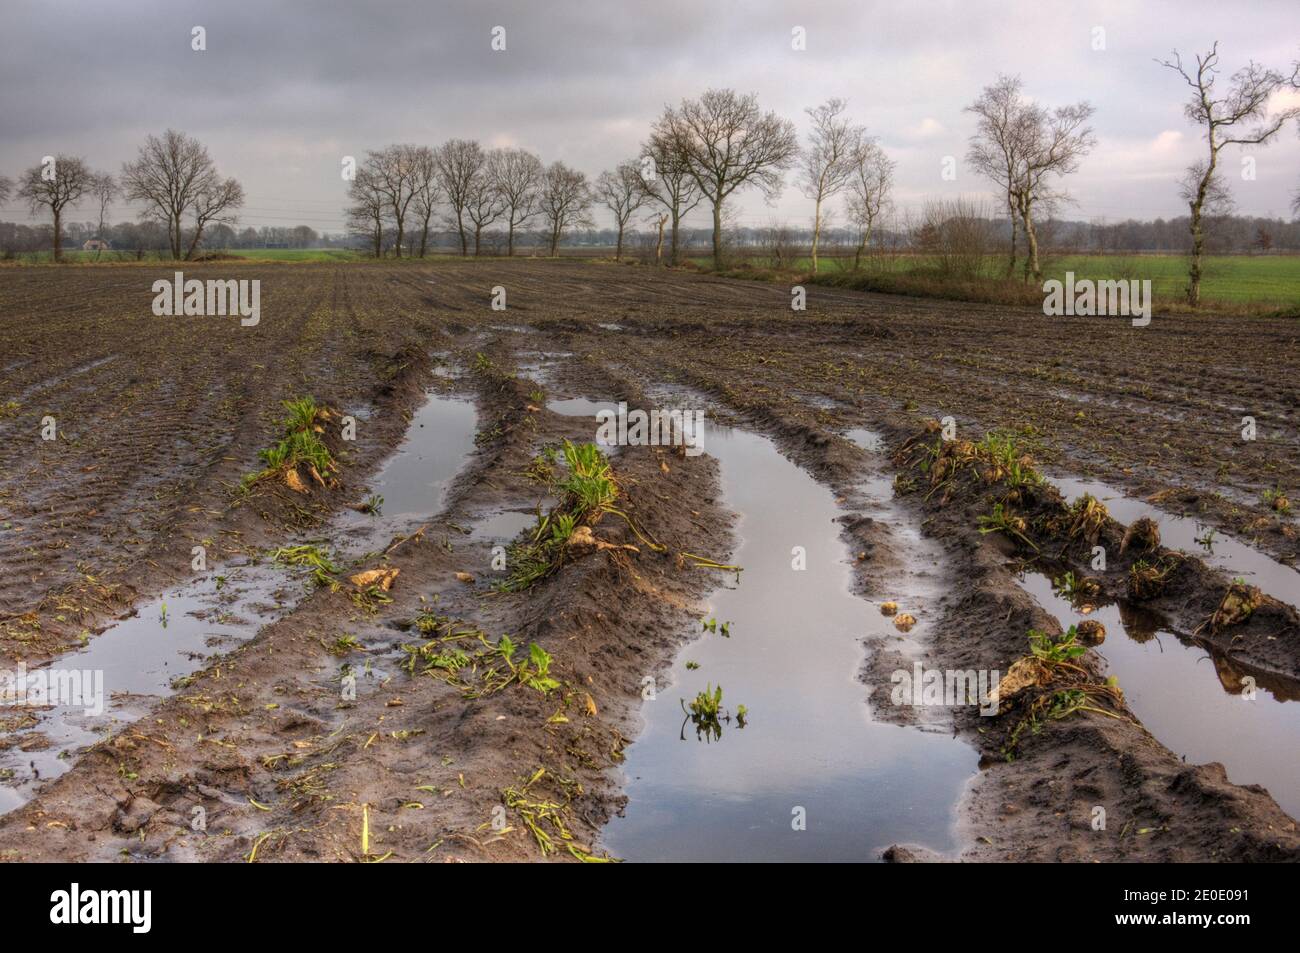 Sugarbeets left during harvest on a muddy field because of bad weather, puddles all around Stock Photo